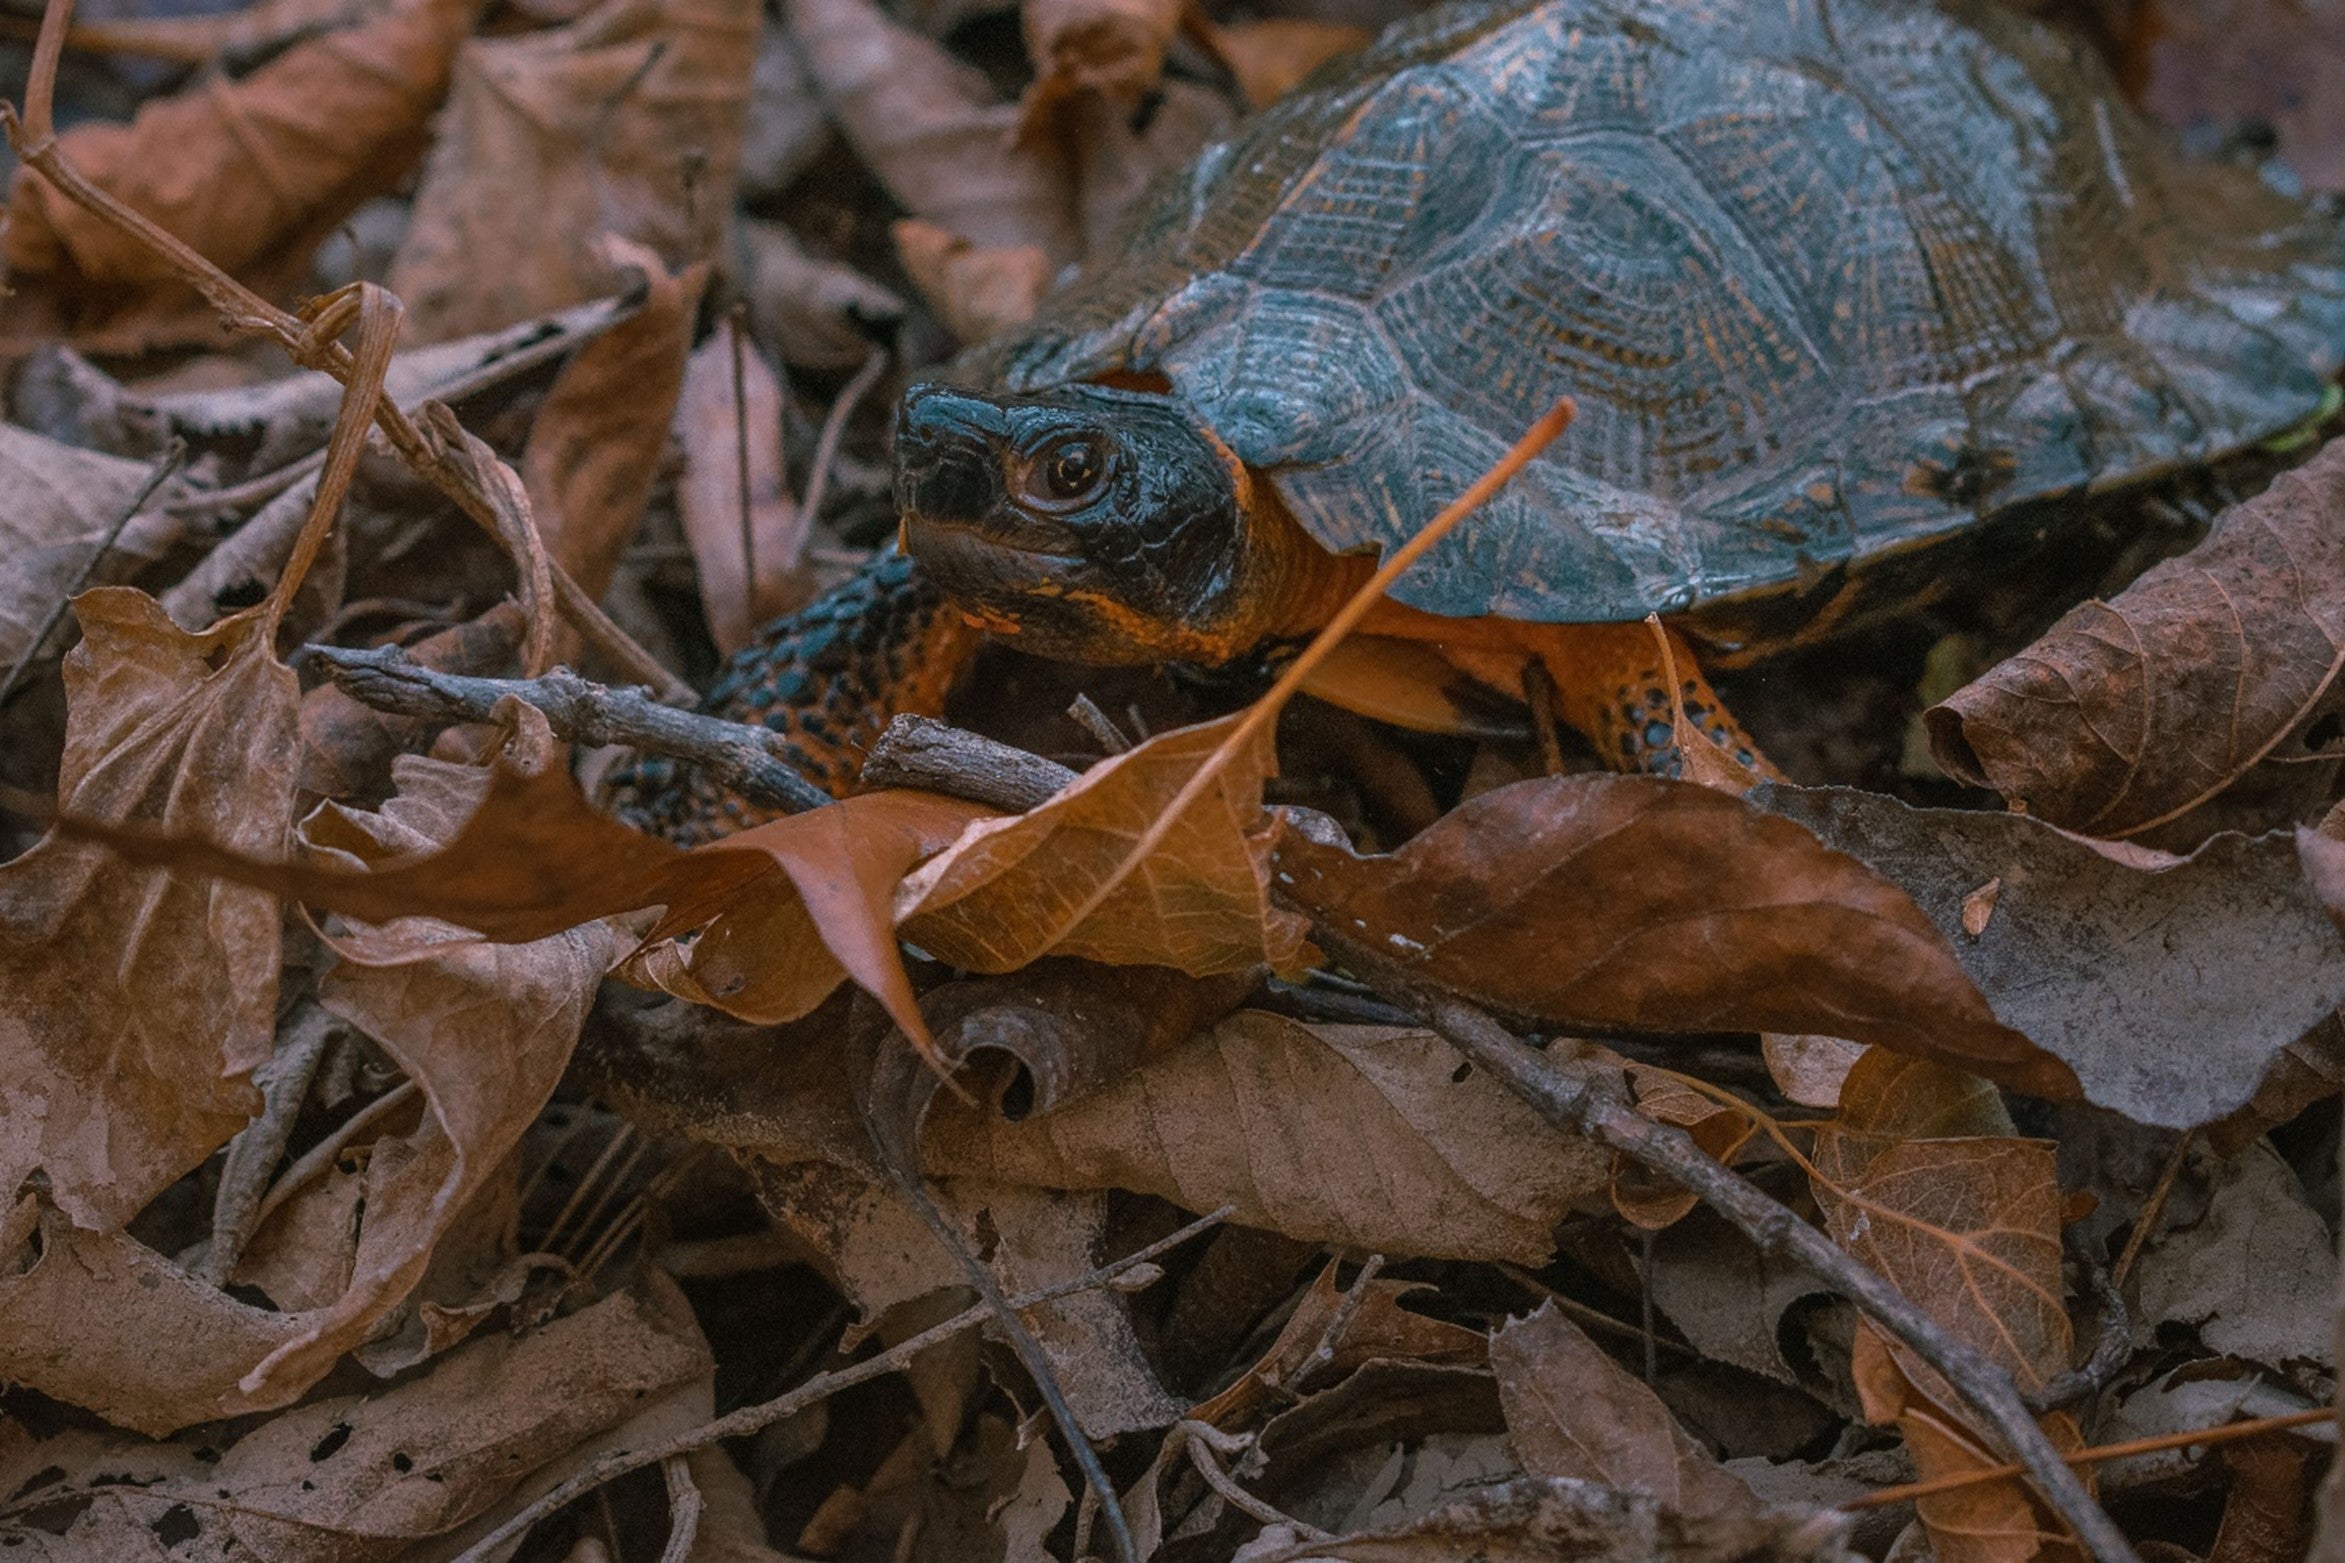 A small wood turtle stands in a pile of fallen leaves in a forest